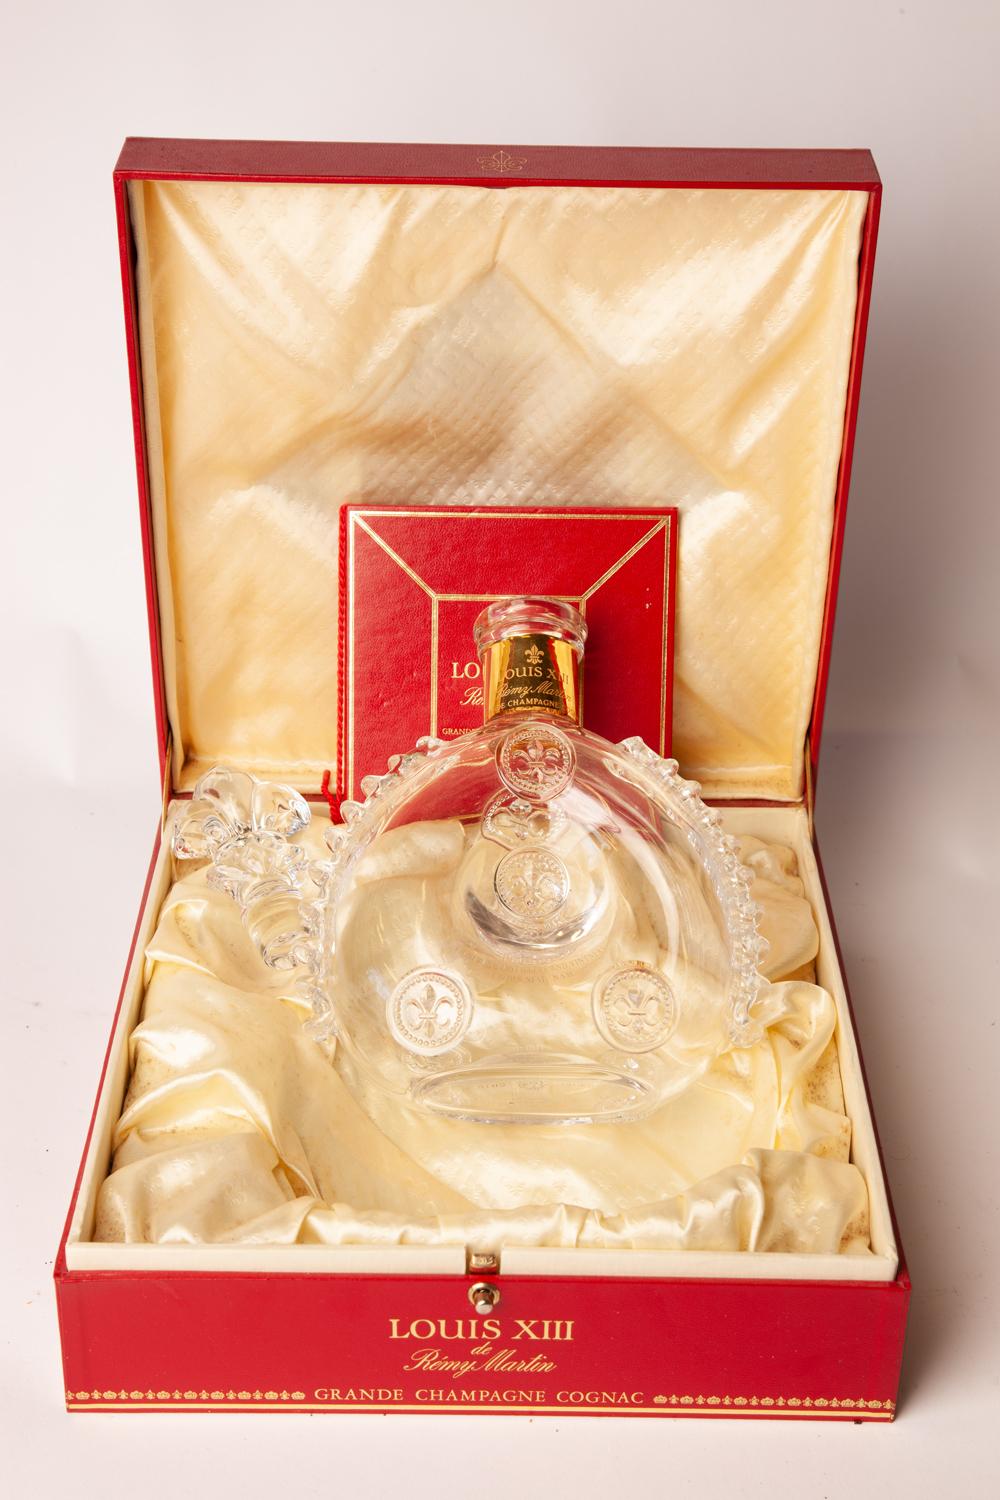 Remy Martin Louis XIII Cognac Baccarat Crystal Decanter Empty